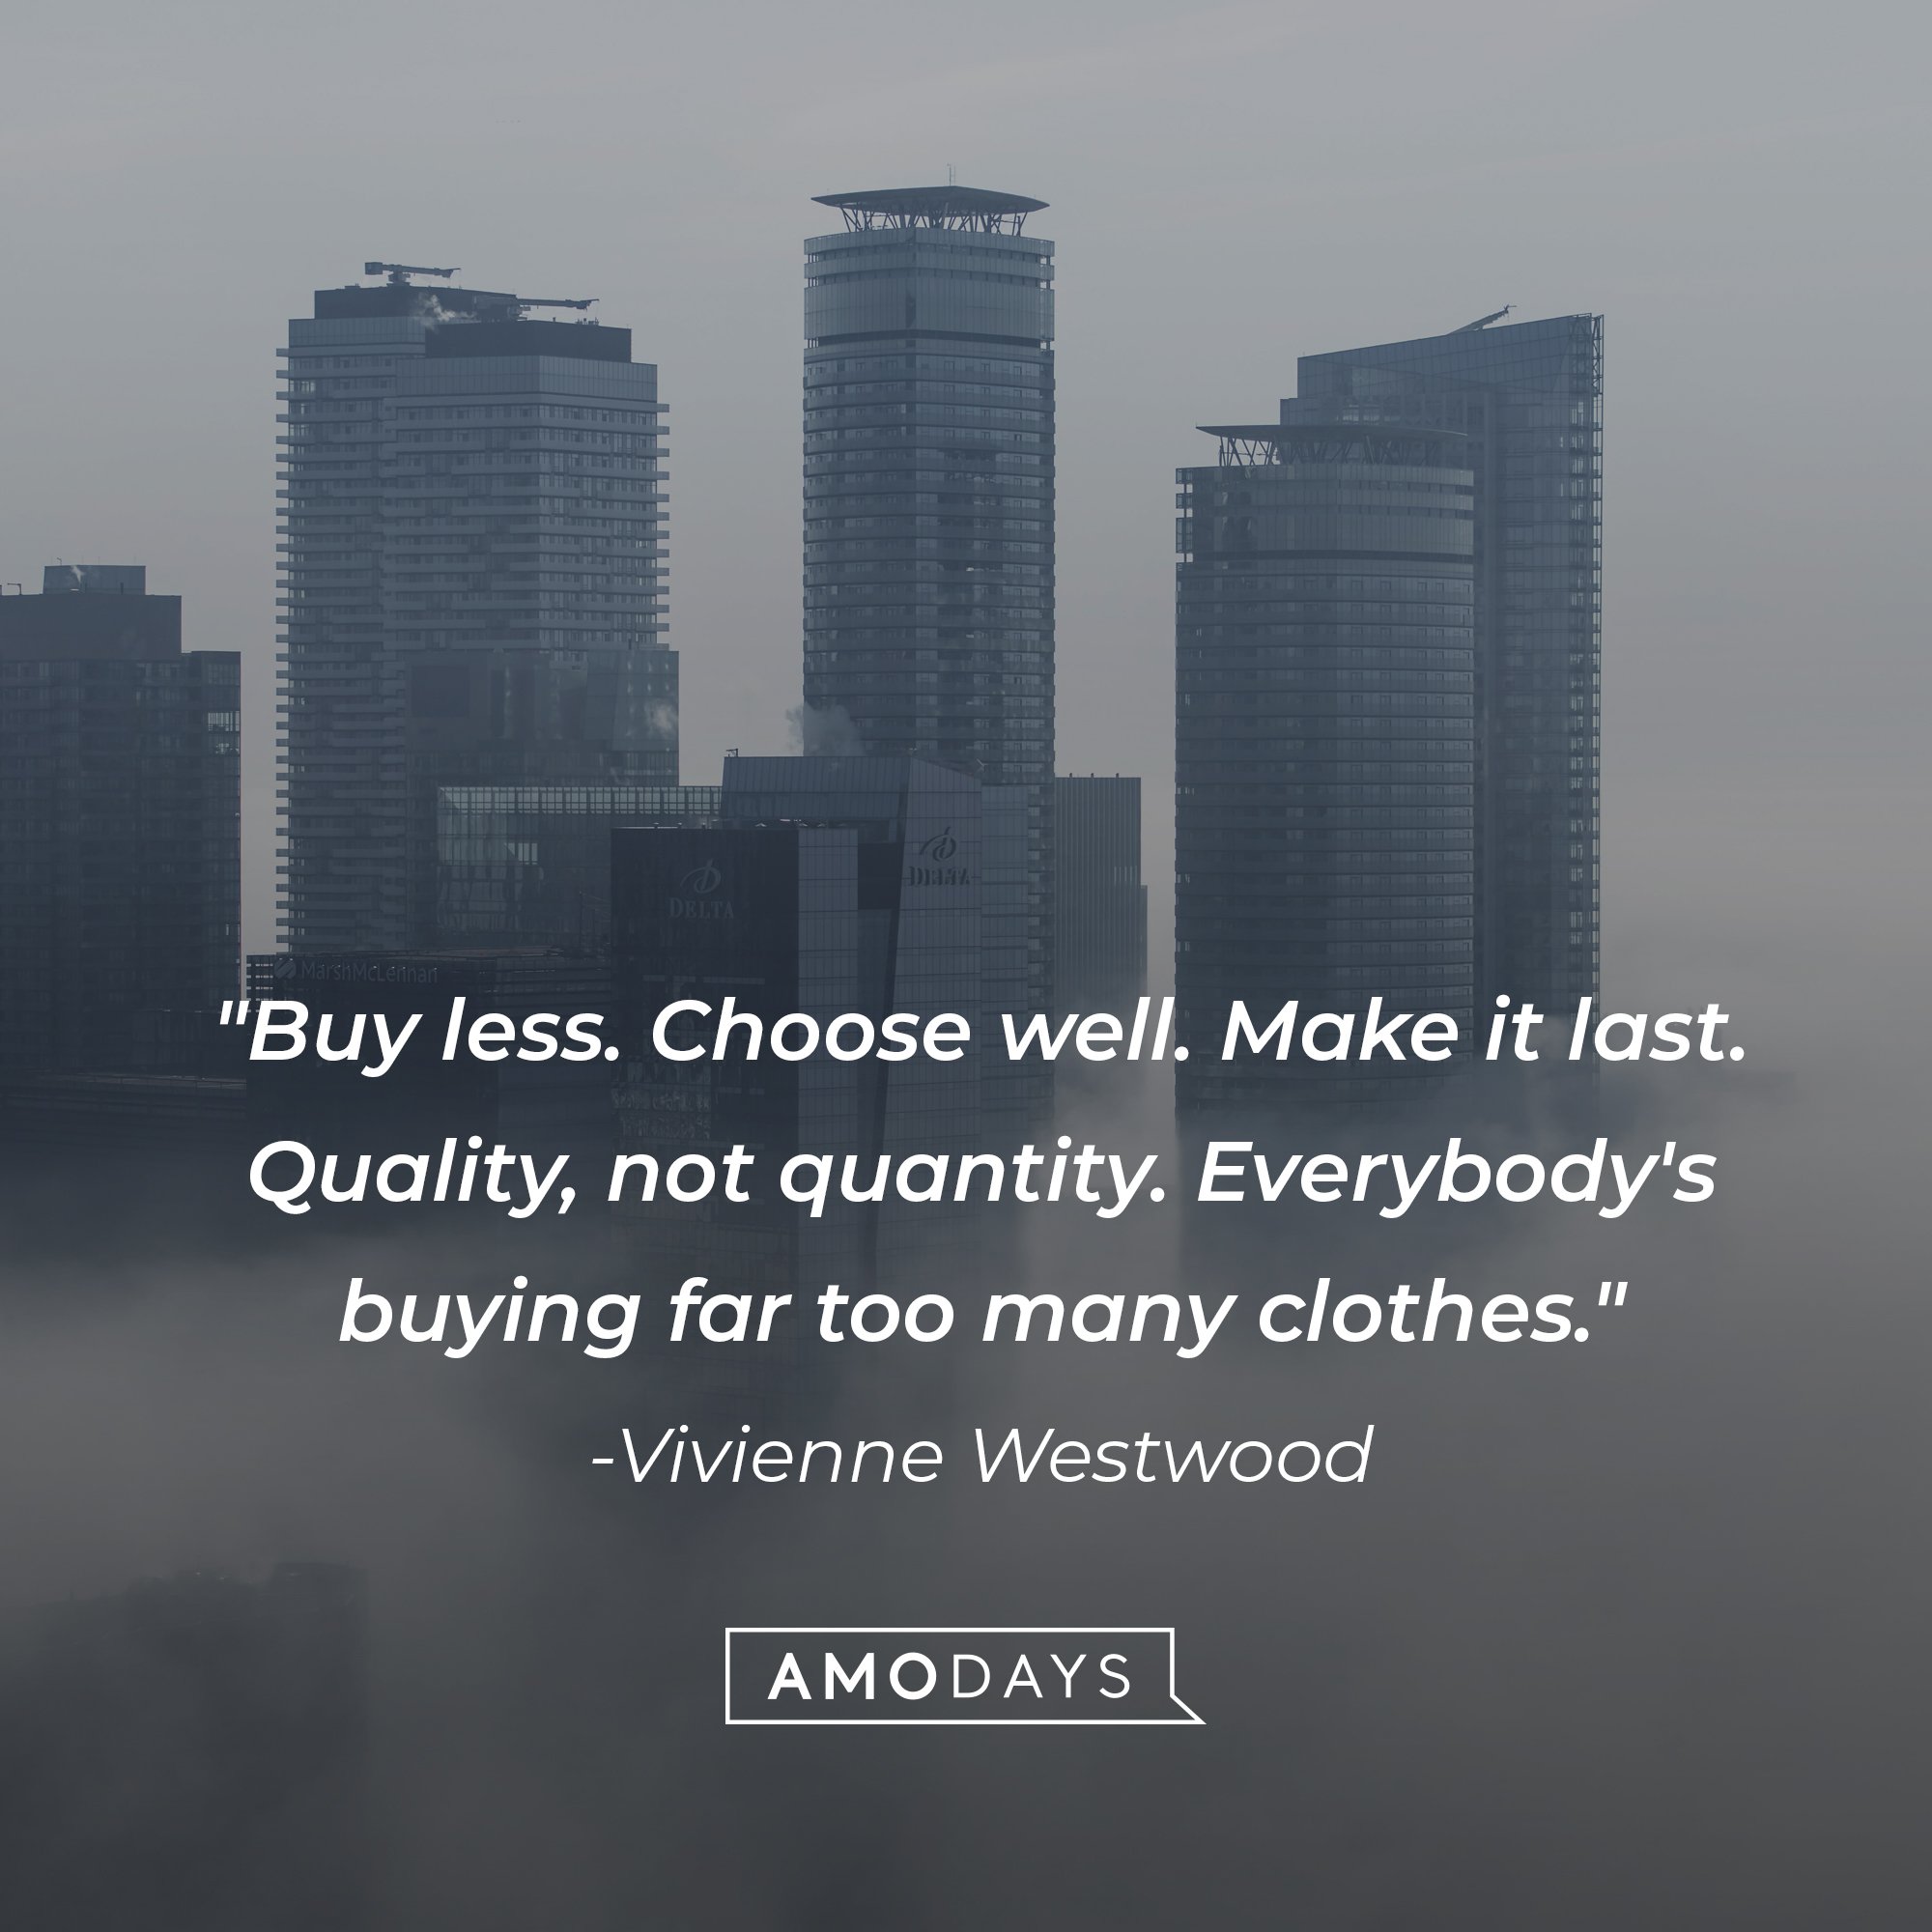 Vivienne Westwood’s quote: "Buy less. Choose well. Make it last. Quality, not quantity. Everybody's buying far too many clothes." | Image: AmoDays 